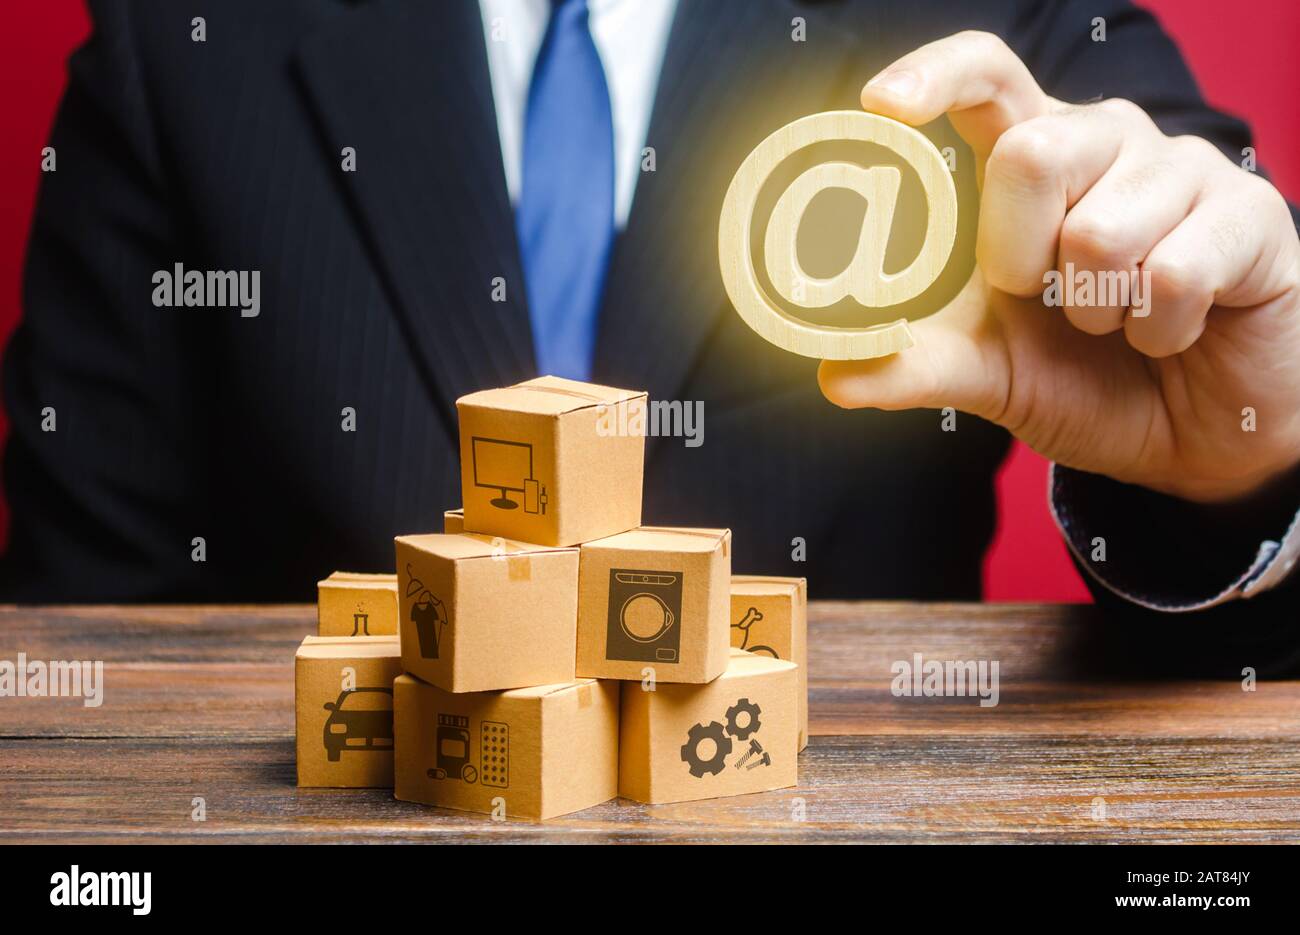 Businessman holds an email internet symbol over boxes. Sales distribution goods products online. Advertising marketing. Digitalization of customs serv Stock Photo